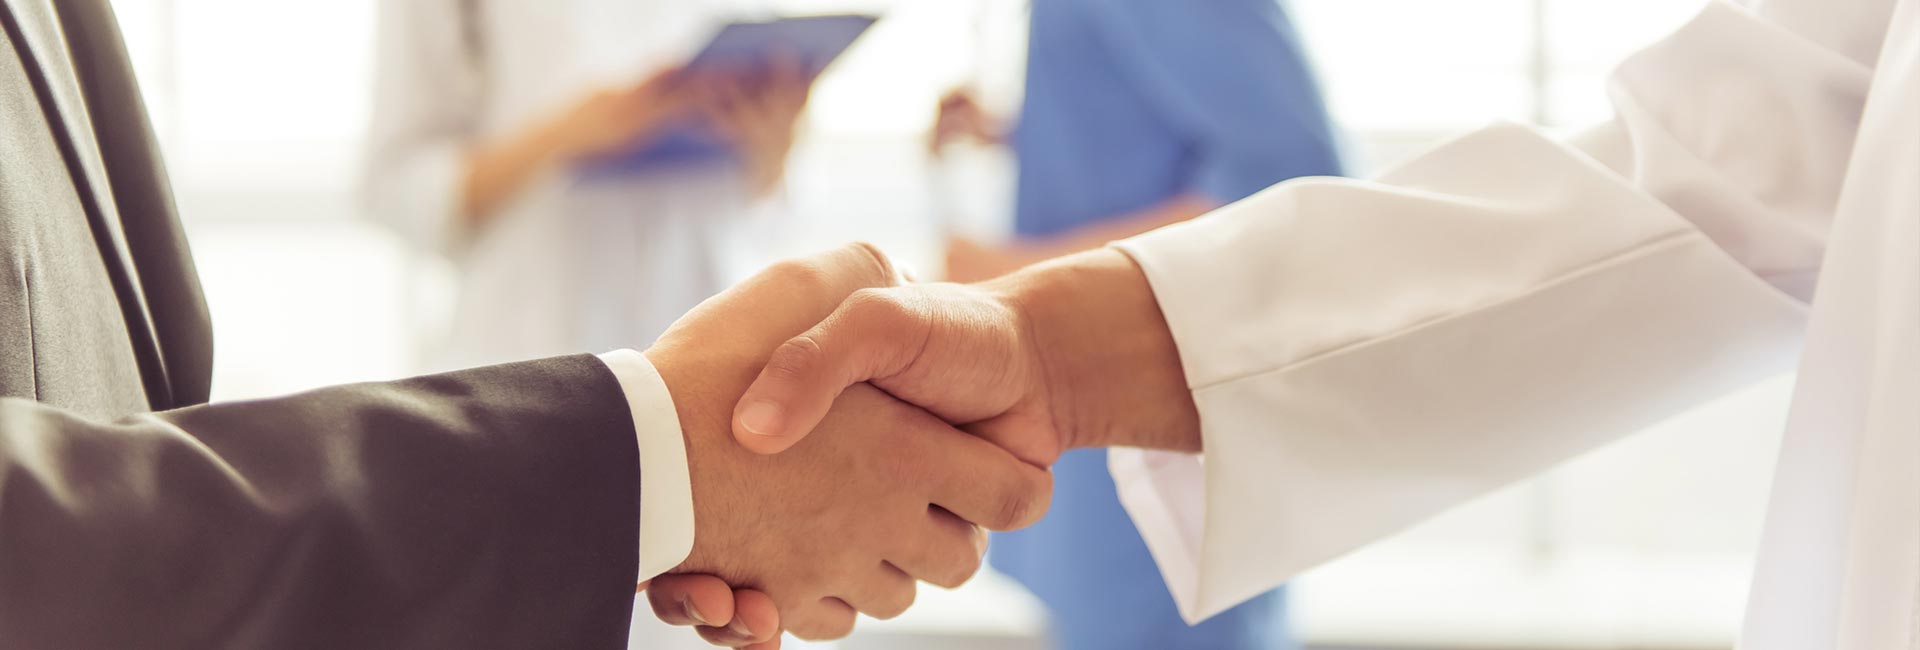 Doctor shaking hands with a client